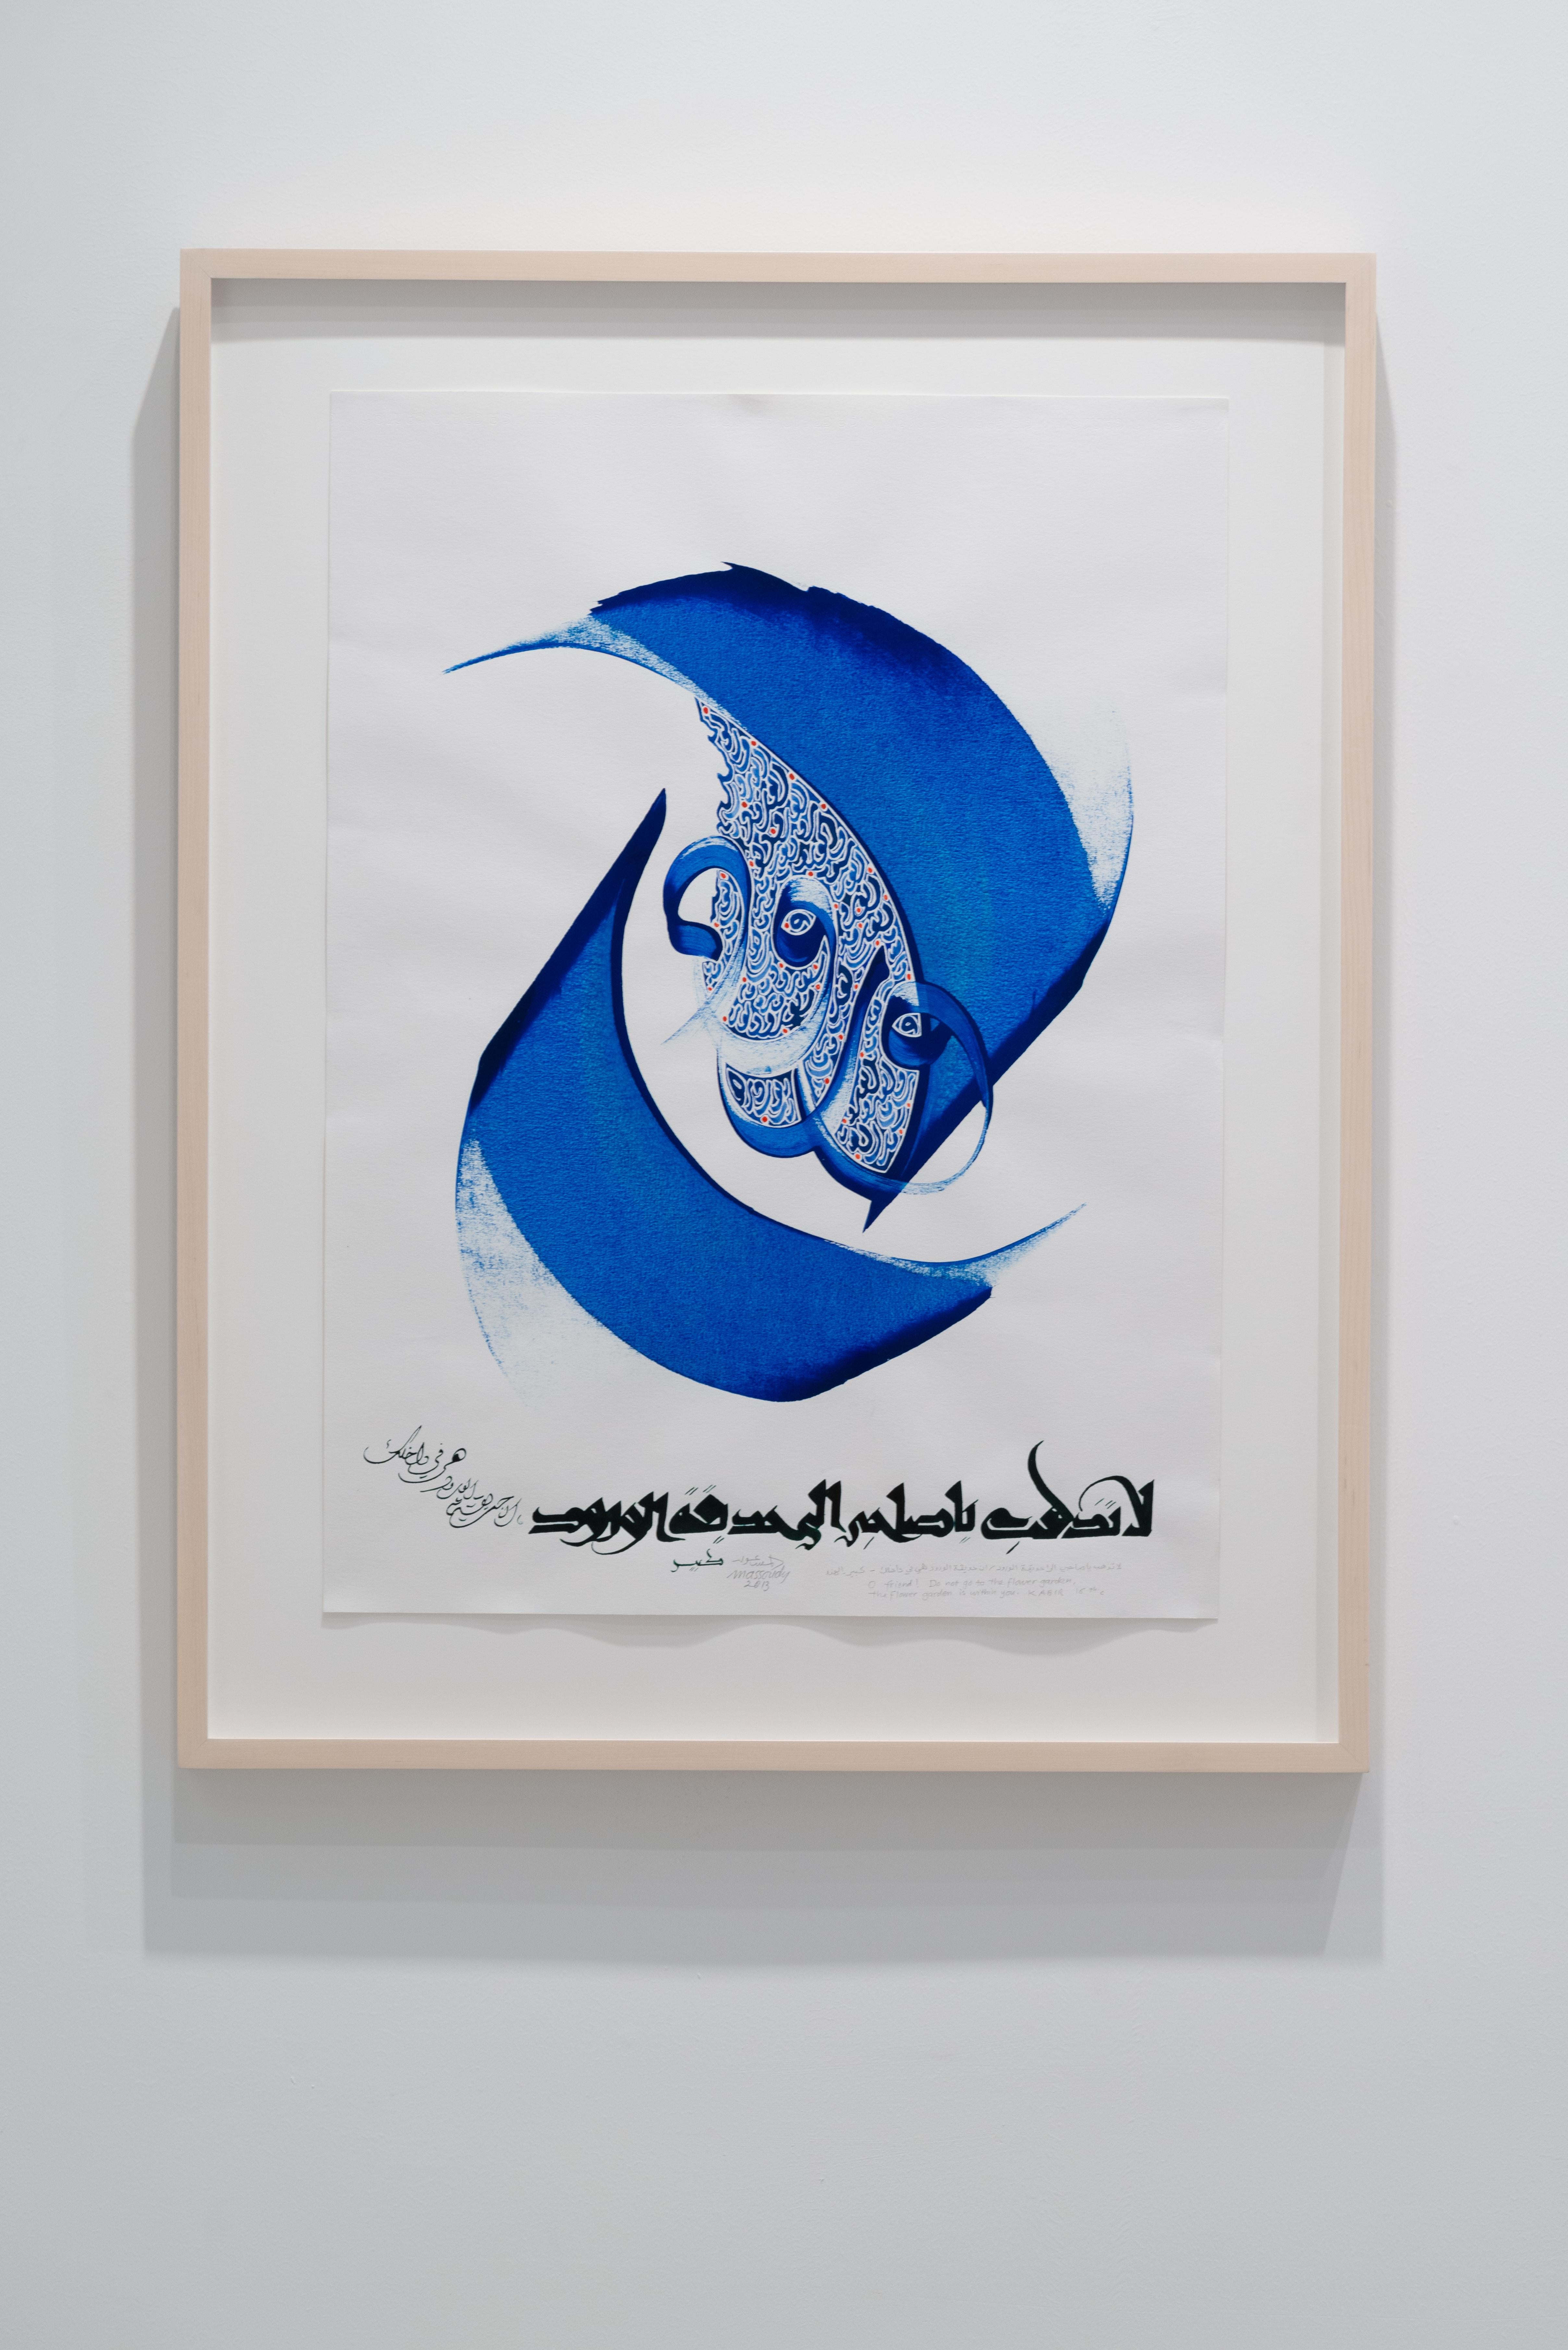 Hassan Massoudy Abstract Drawing - Vibrant blue contemporary Islamic calligraphy on paper